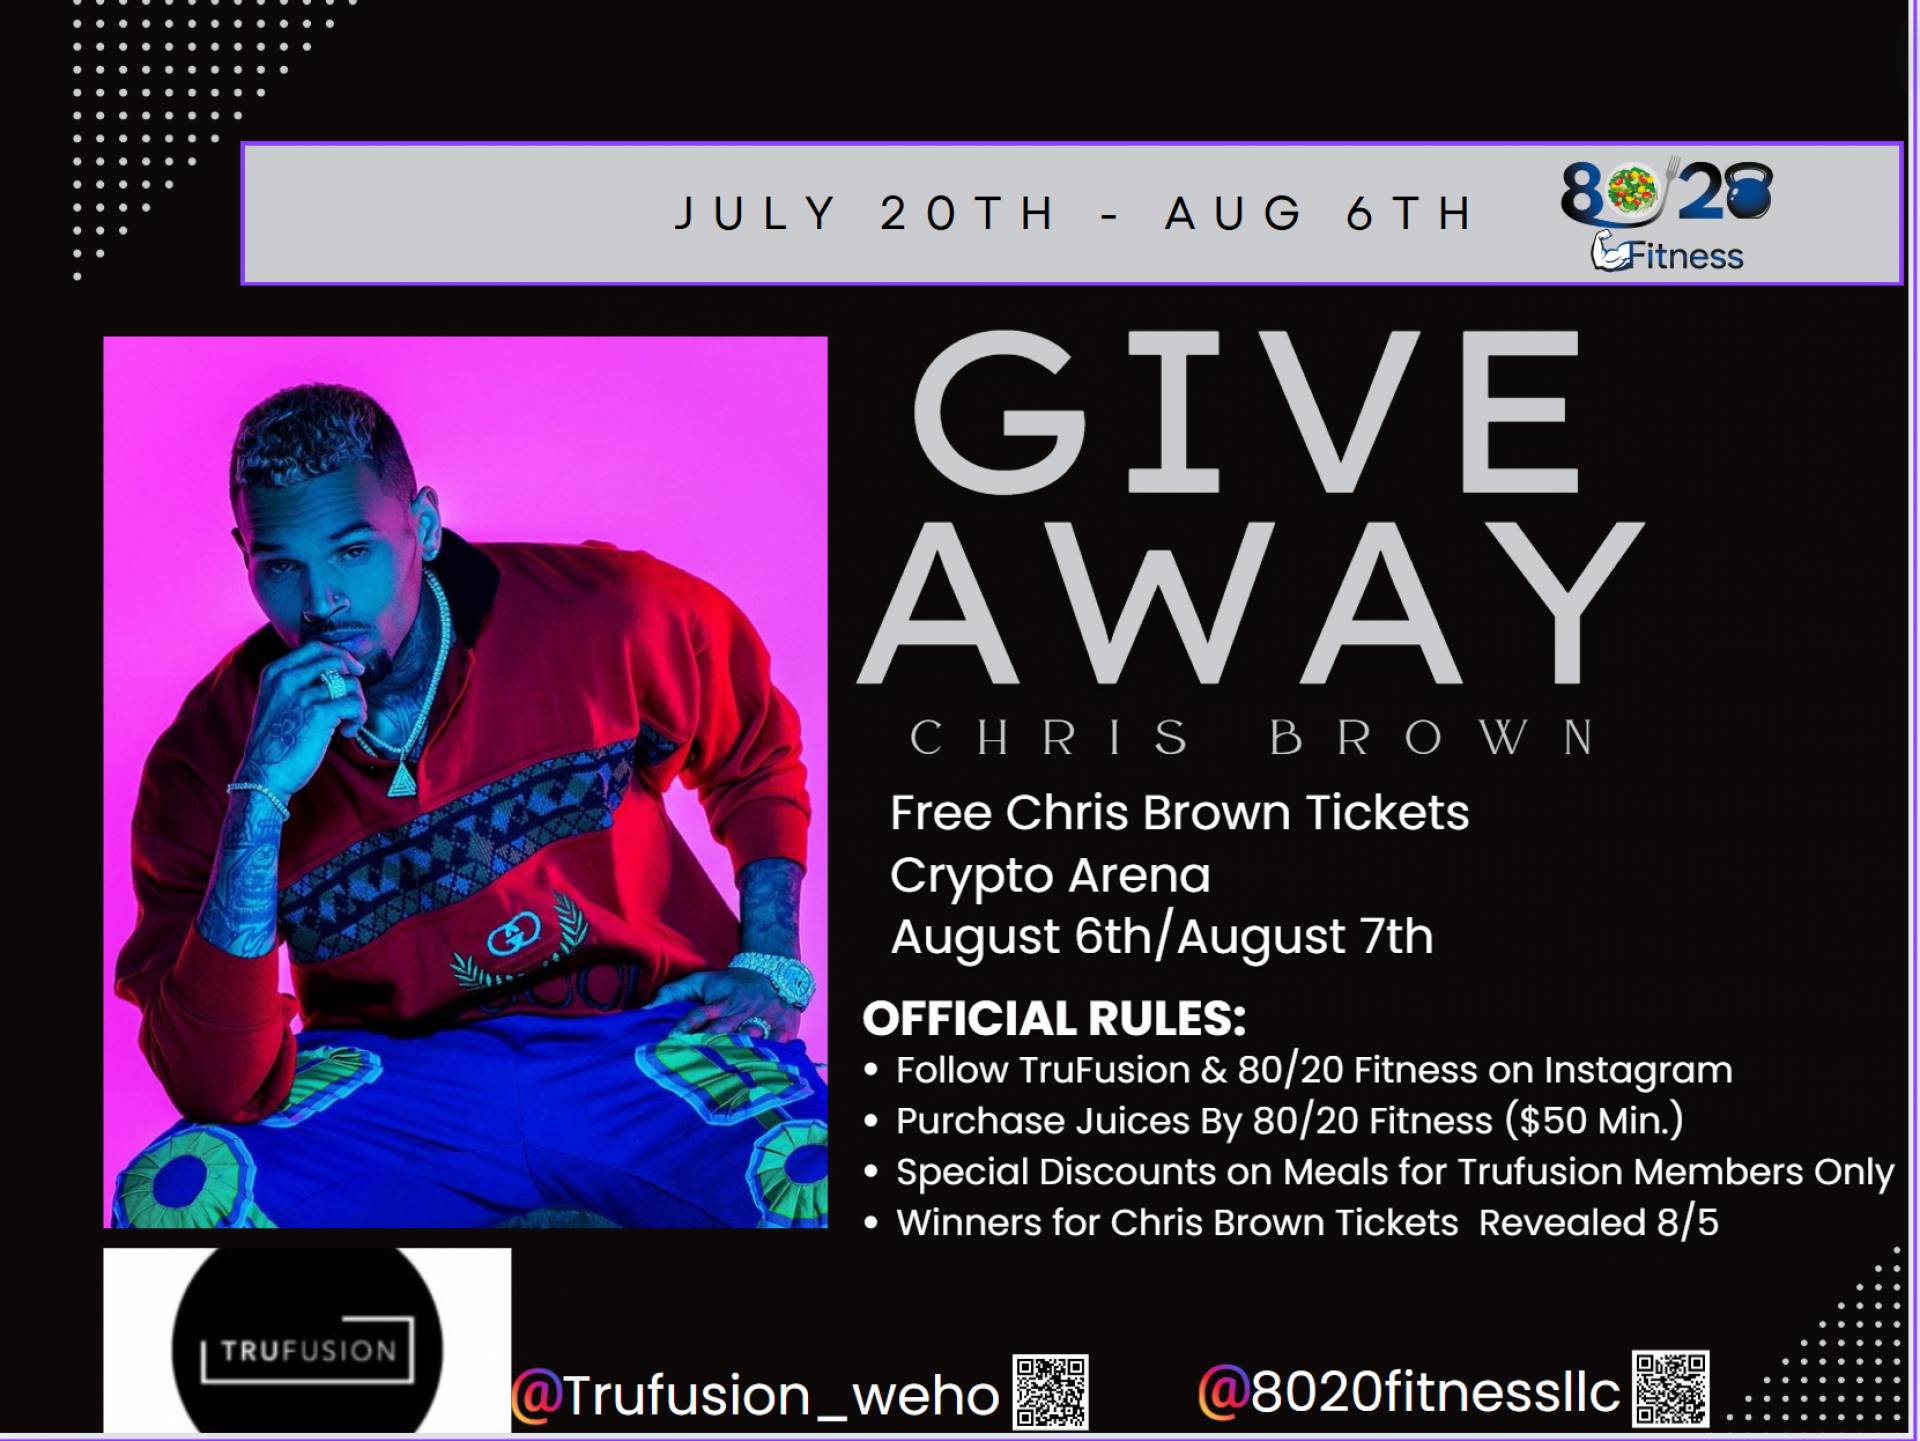 TruFusion x 80/20 Fitness - Chris Brown Giveaway